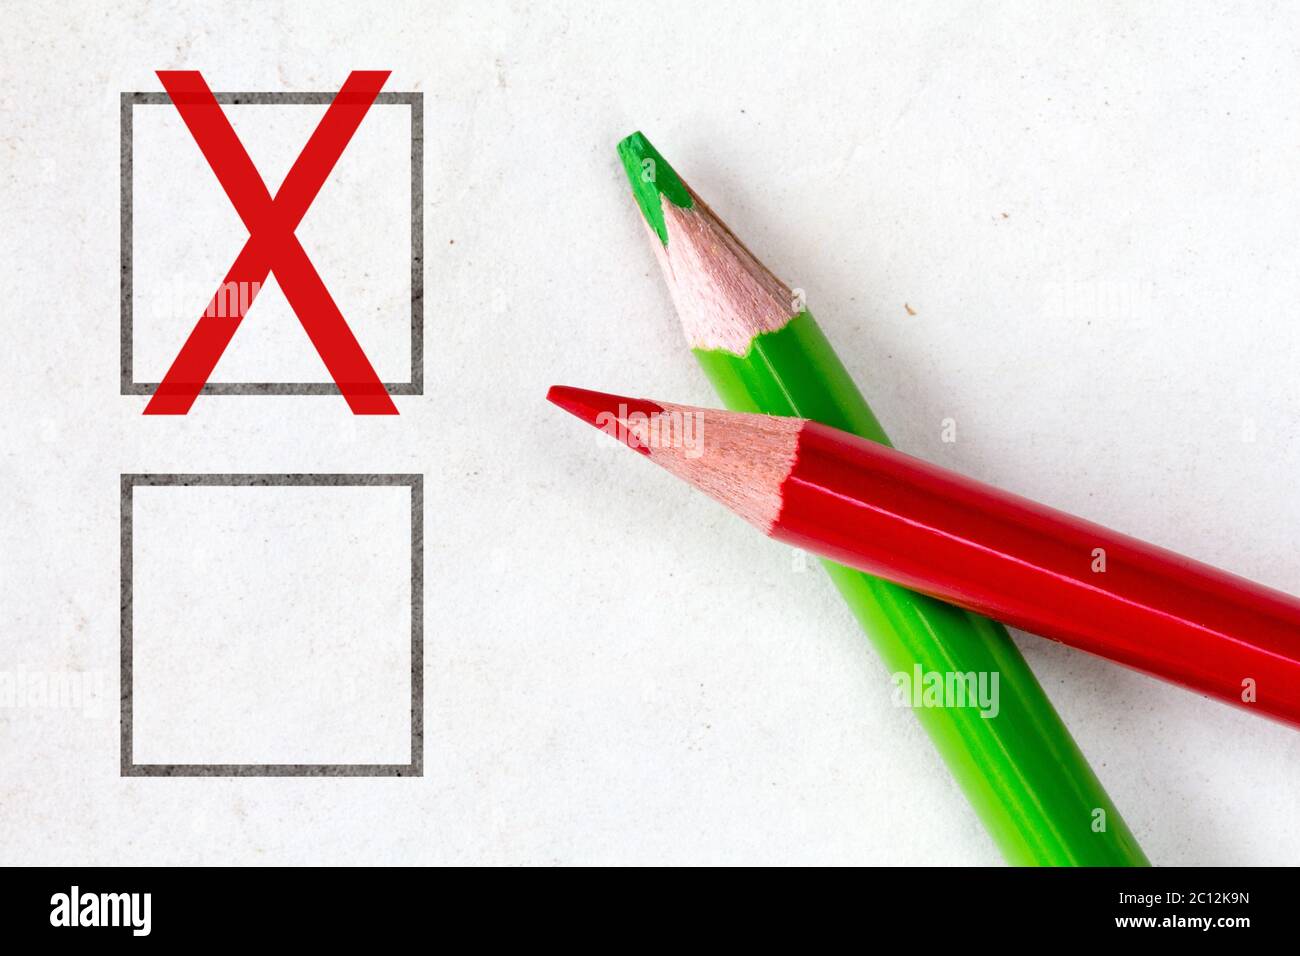 Red and green pencils with marking checkbox Stock Photo